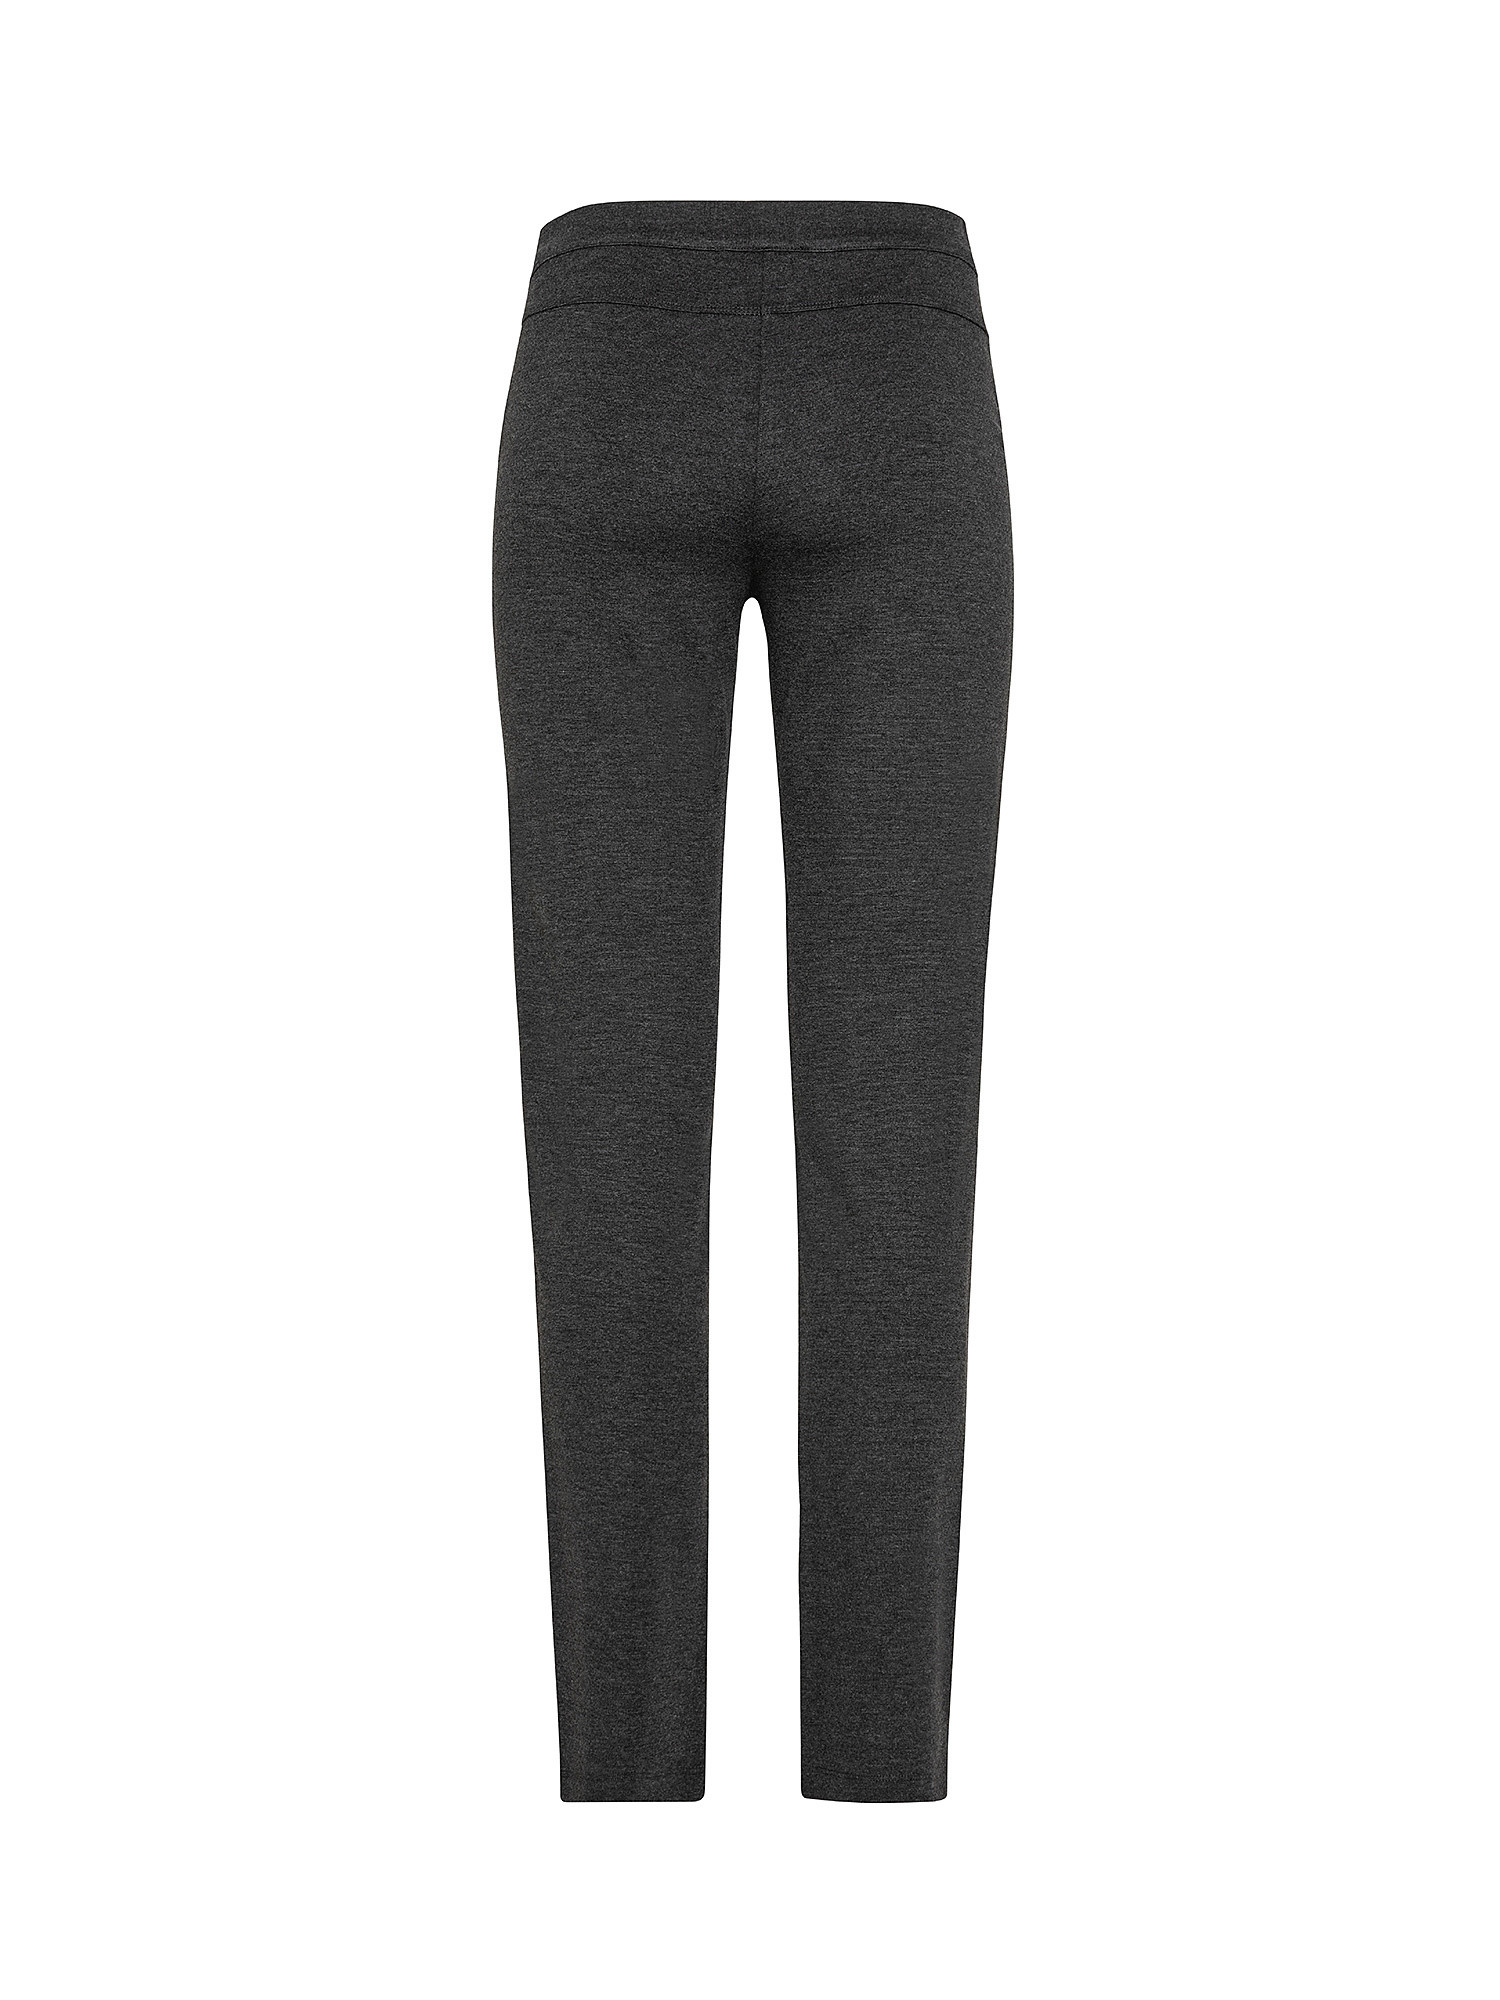 Trousers with pockets, Grey, large image number 1